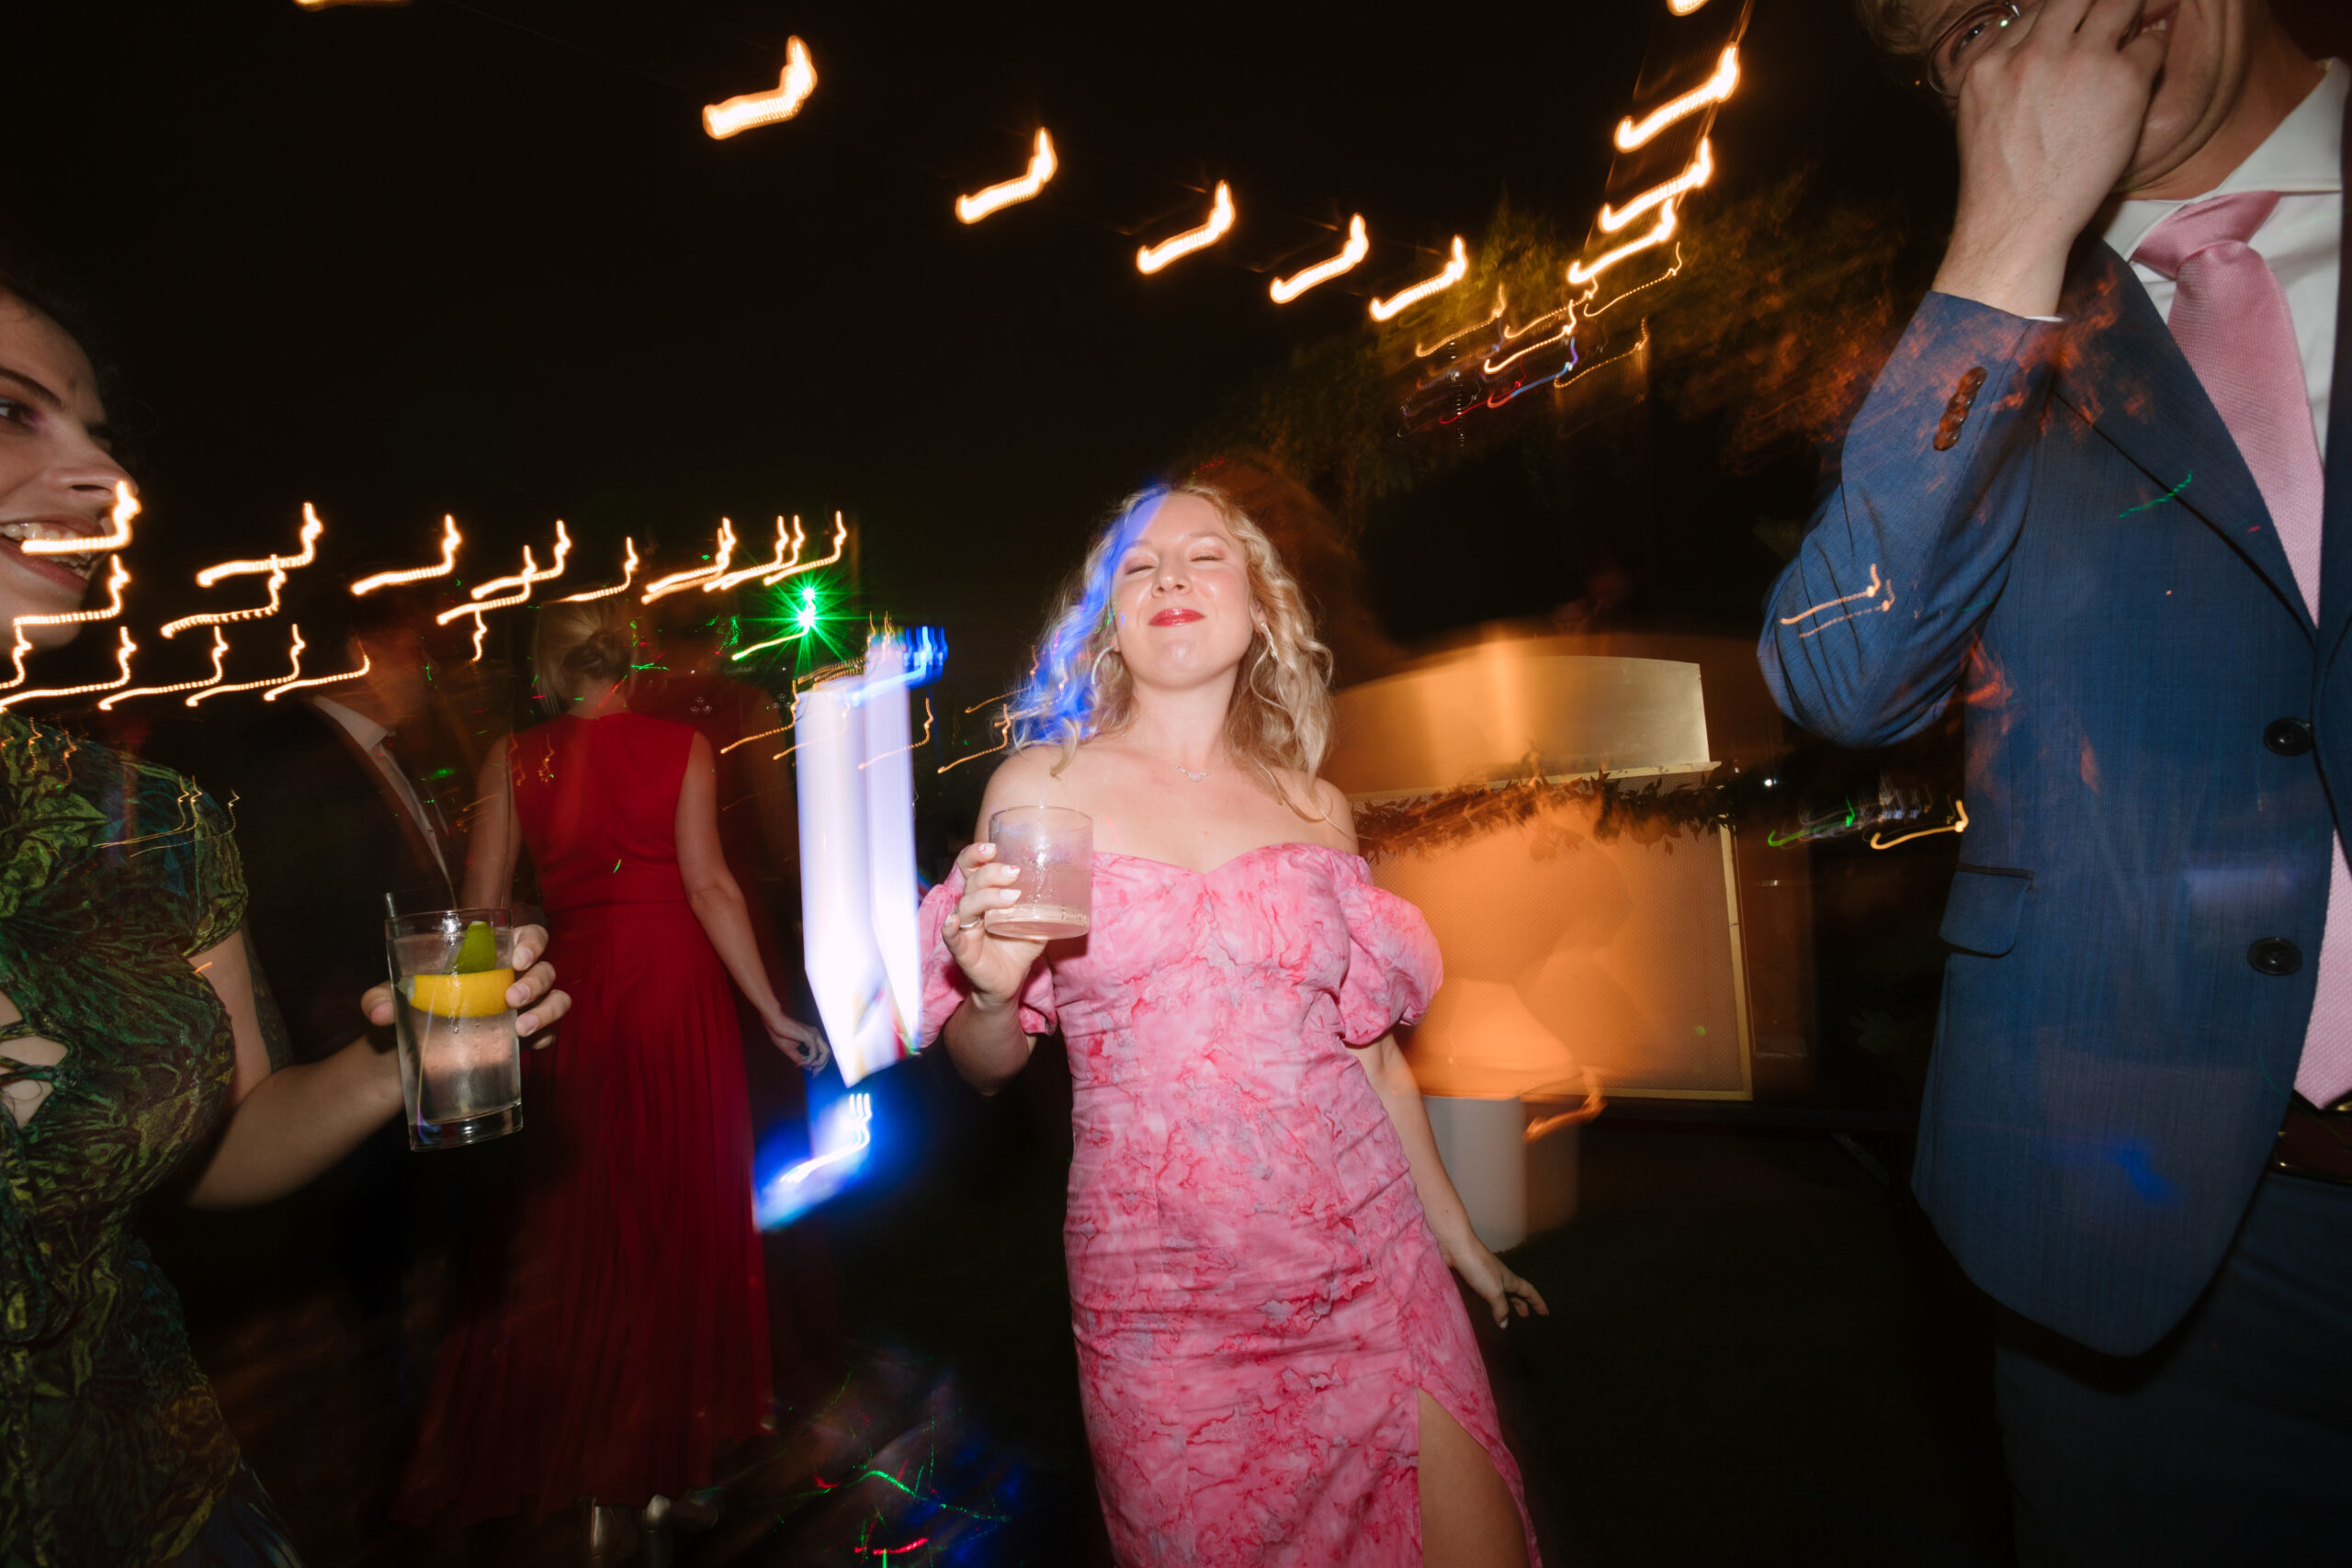 shutter drag flash photo of wedding guest in pink dress dancing with a cocktail